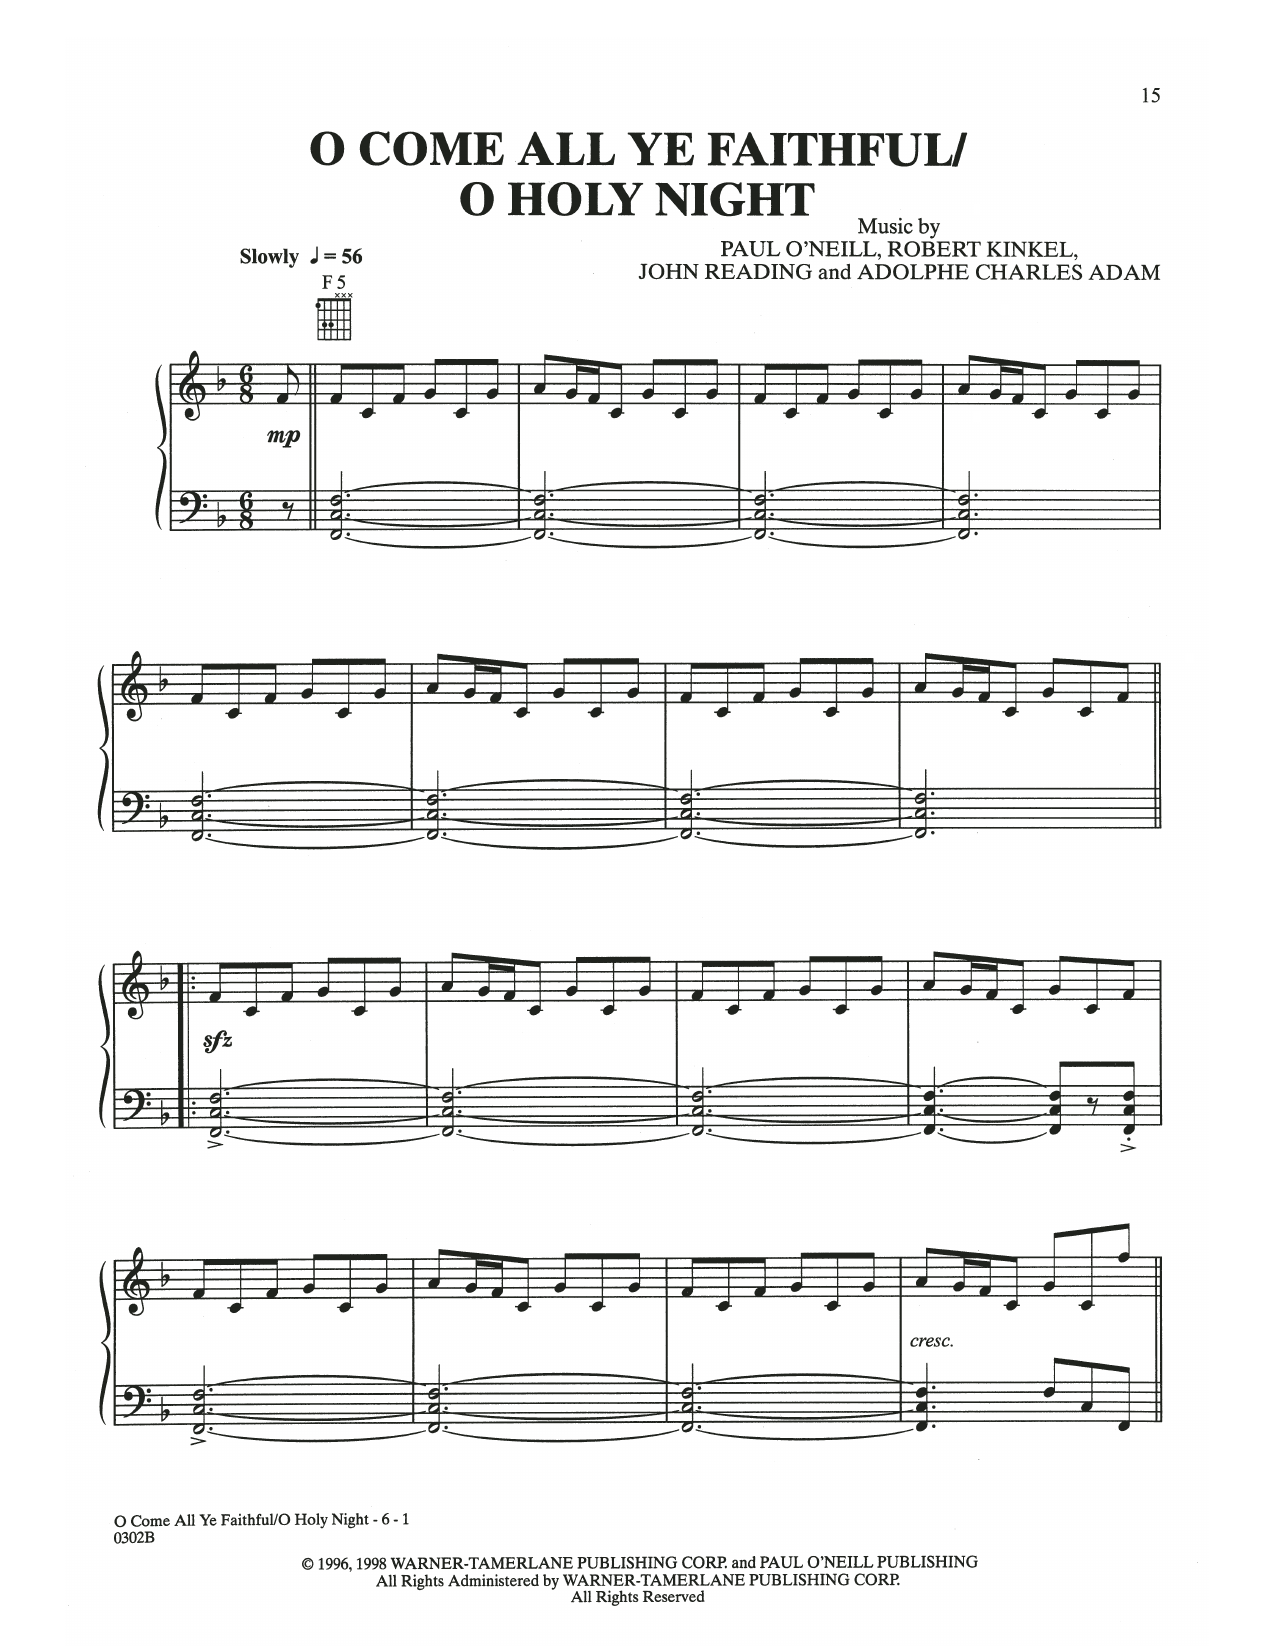 Download Trans-Siberian Orchestra O Come All Ye Faithful / O Holy Night Sheet Music